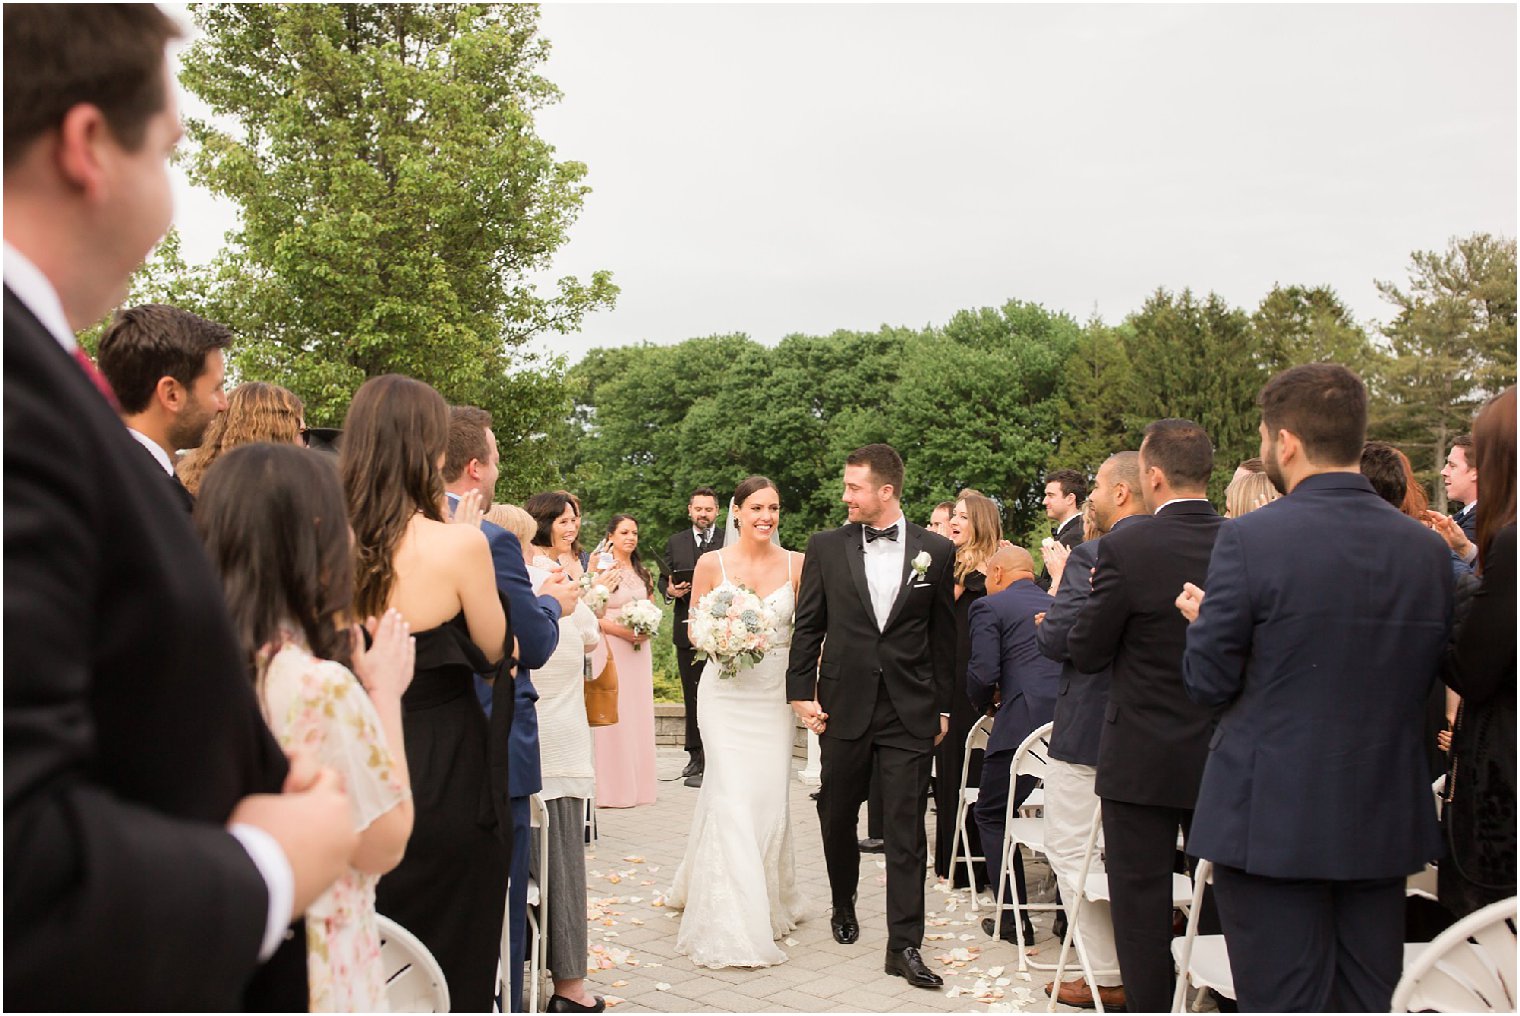 Couple's recessional photo at Windows on the Water at Frogbridge